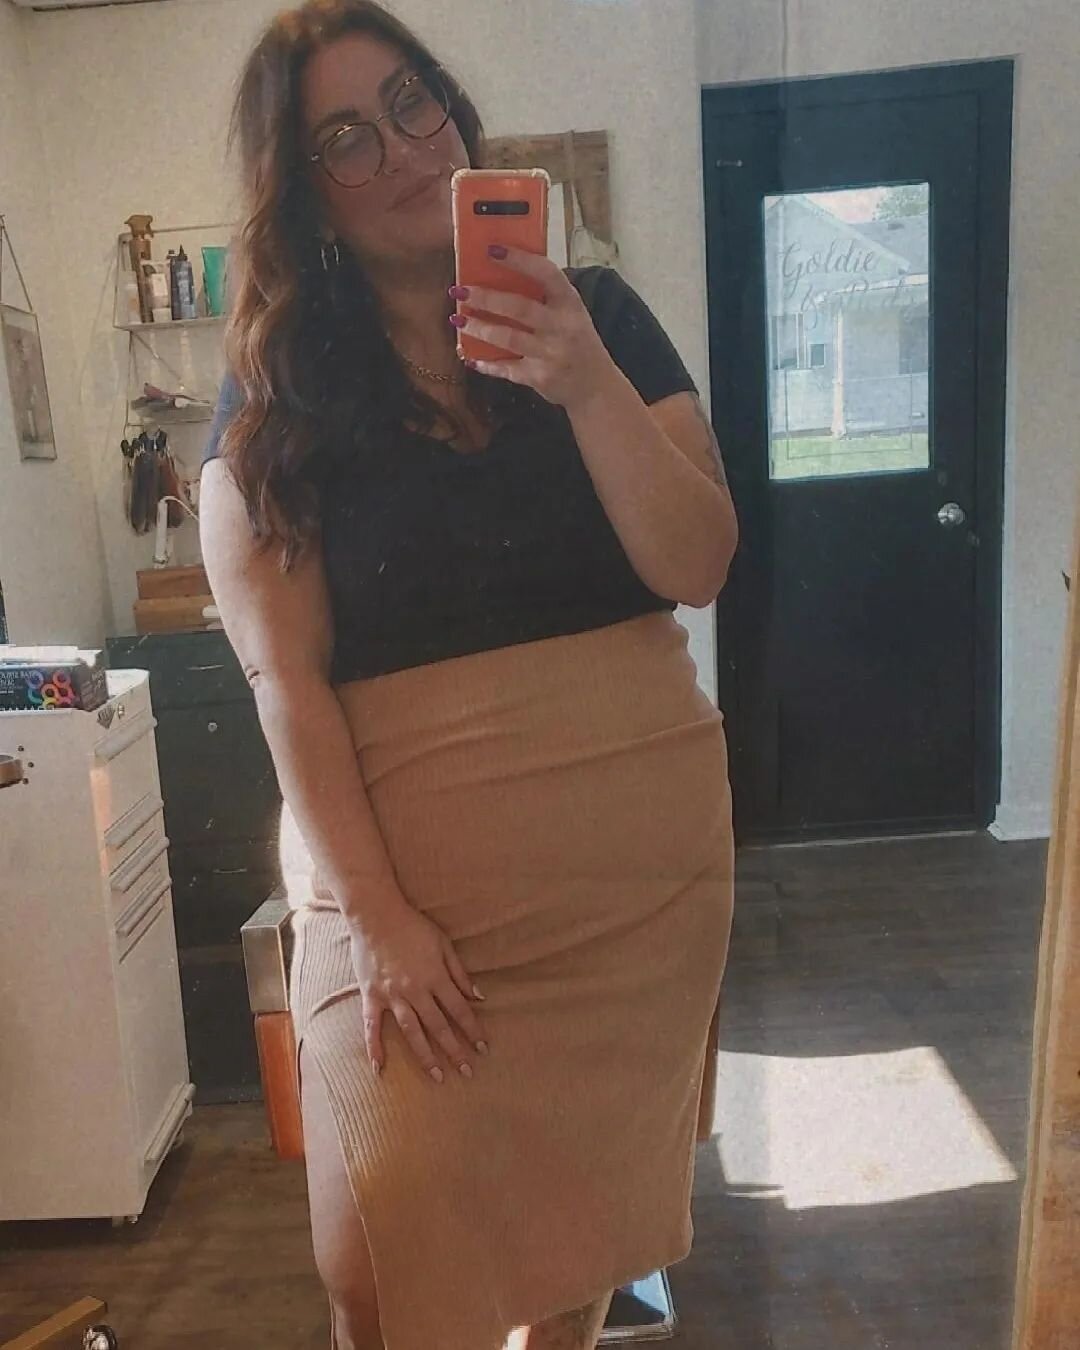 Ope..haven't posted a mirror selfie in awhile!

You guys need this cotton ribbed pencil skirt for your fall clothes lineup! @walmartfashion did it again!